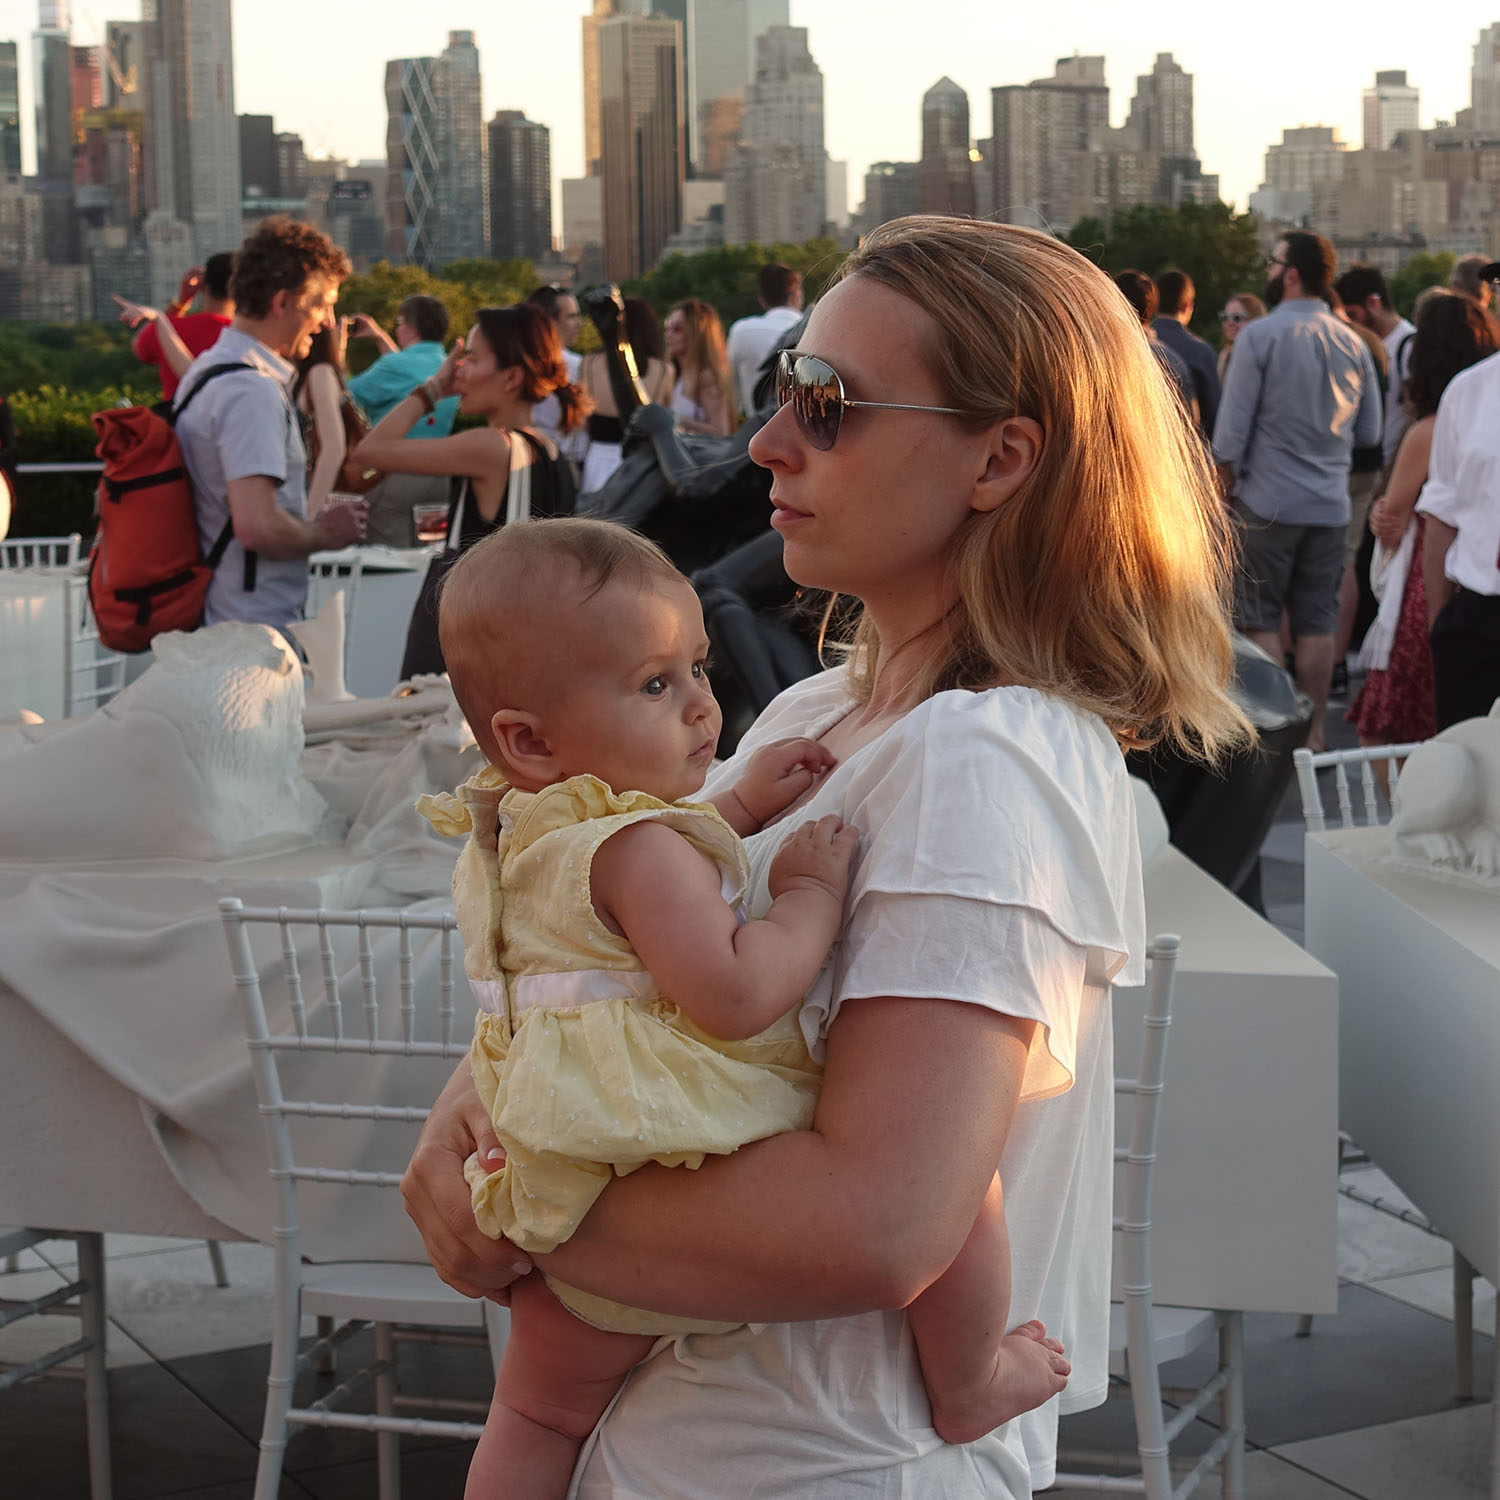 Anastasia Louise Sudentas visits an exhibition by Argentinian artist Adrián Villar Rojas on the Met's Roof 